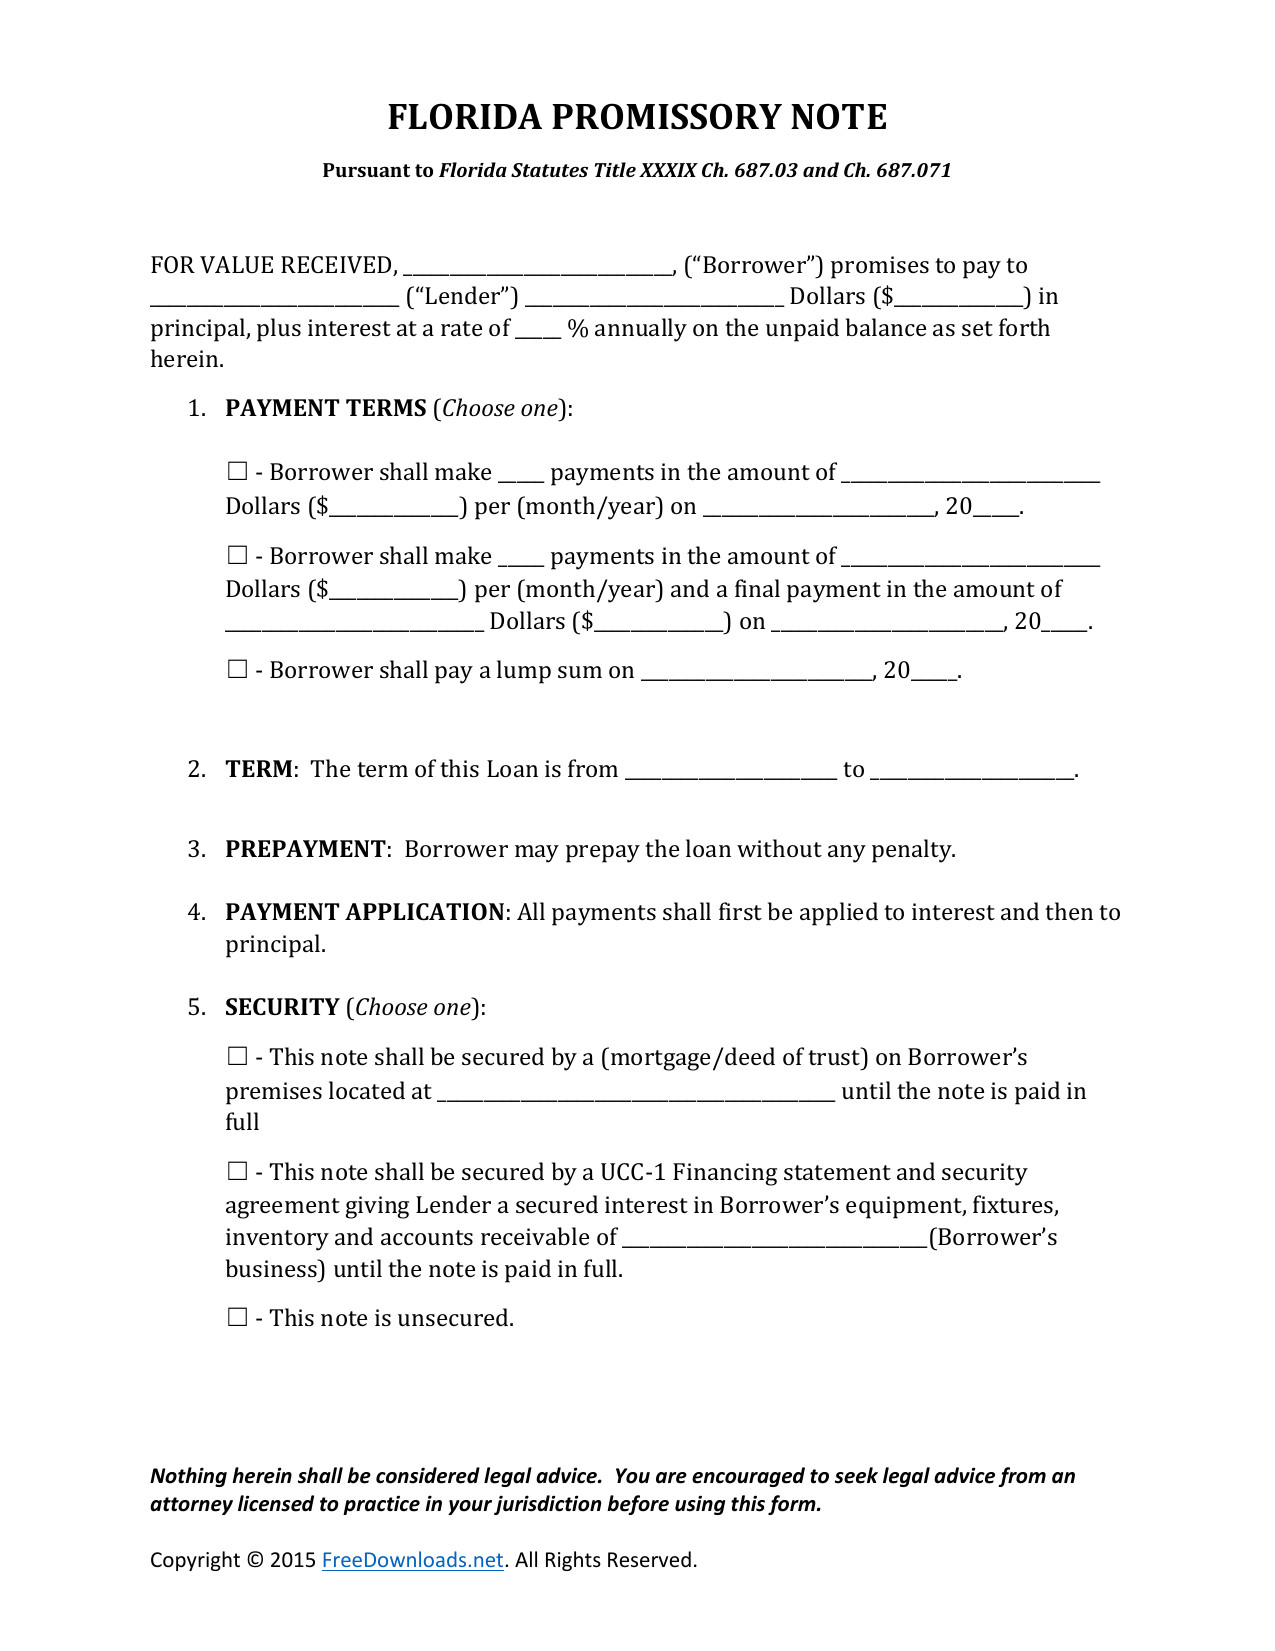 Promissory Note Template Florida Download Florida Promissory Note form Pdf Rtf